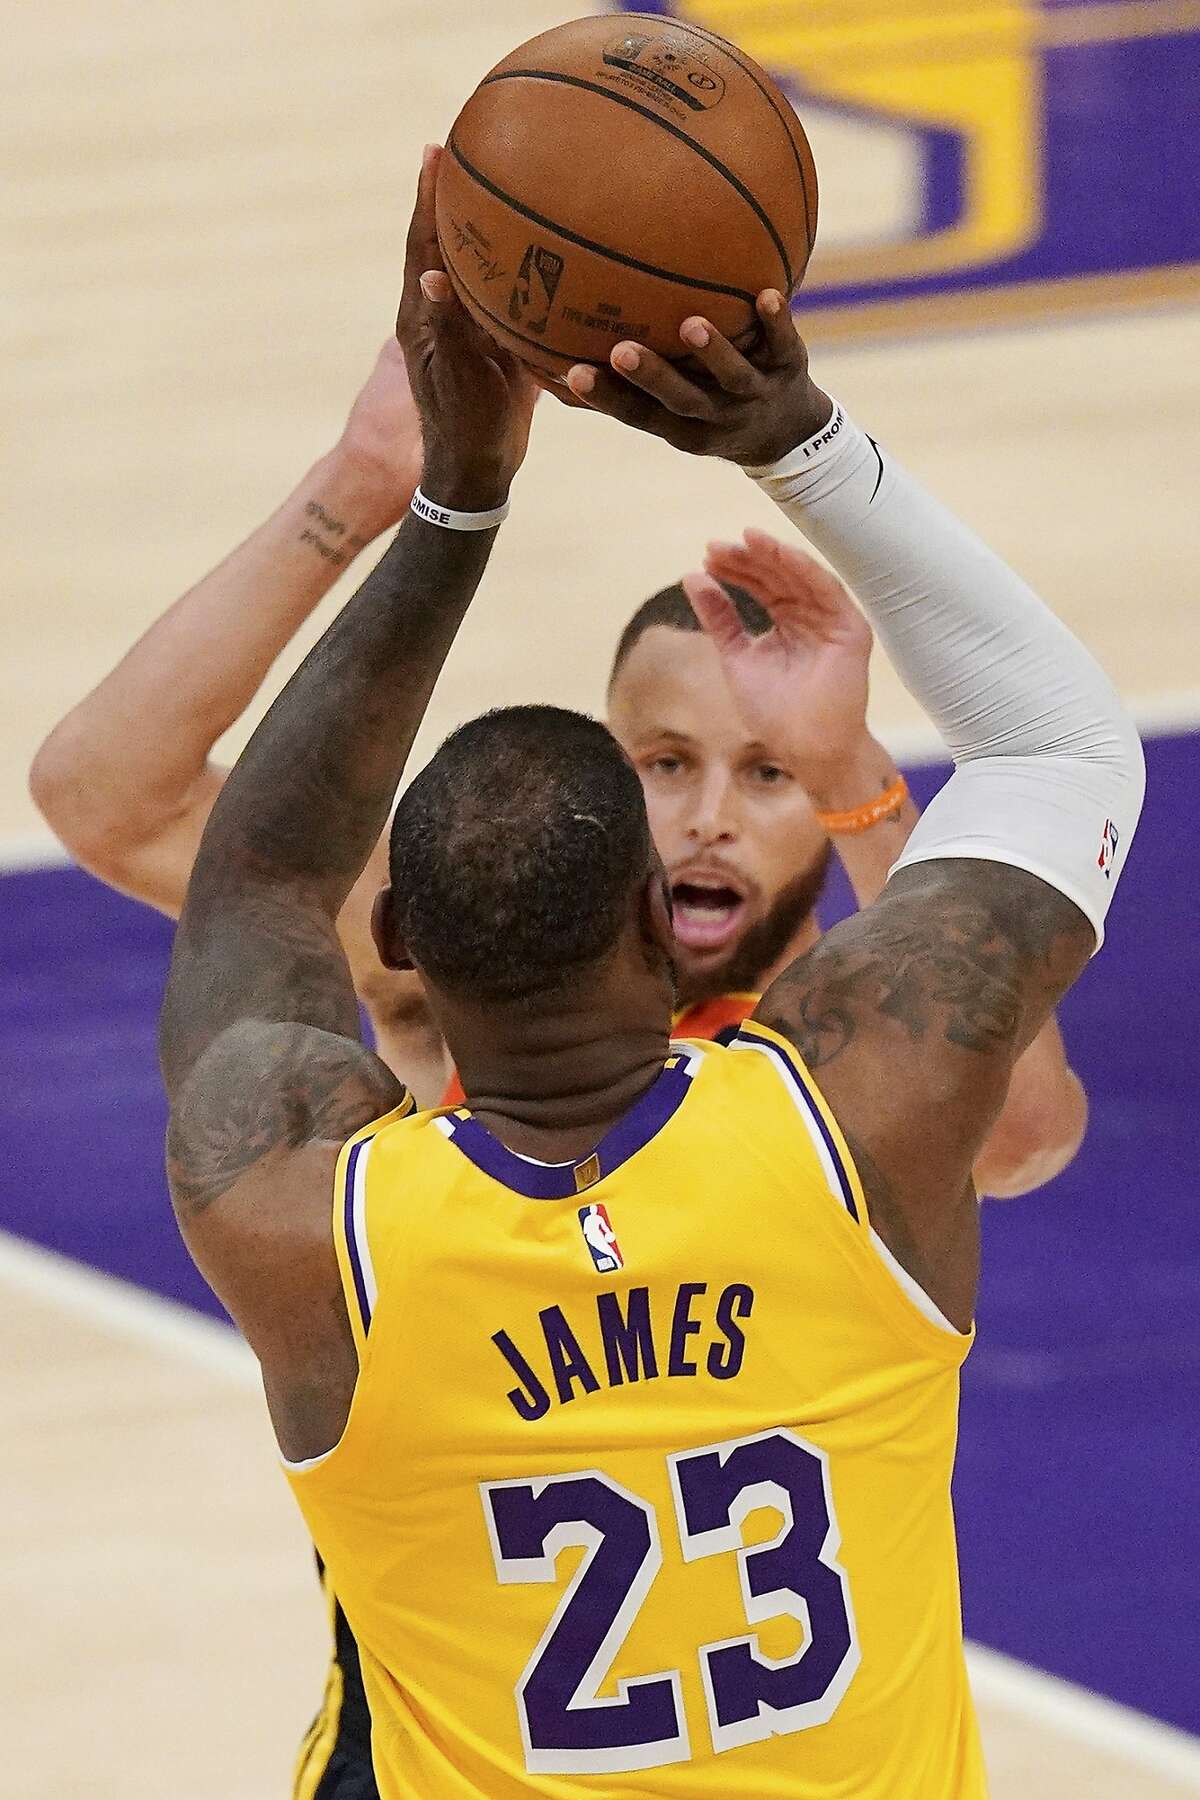 Playing low minutes isn't good for me, says Lakers' James